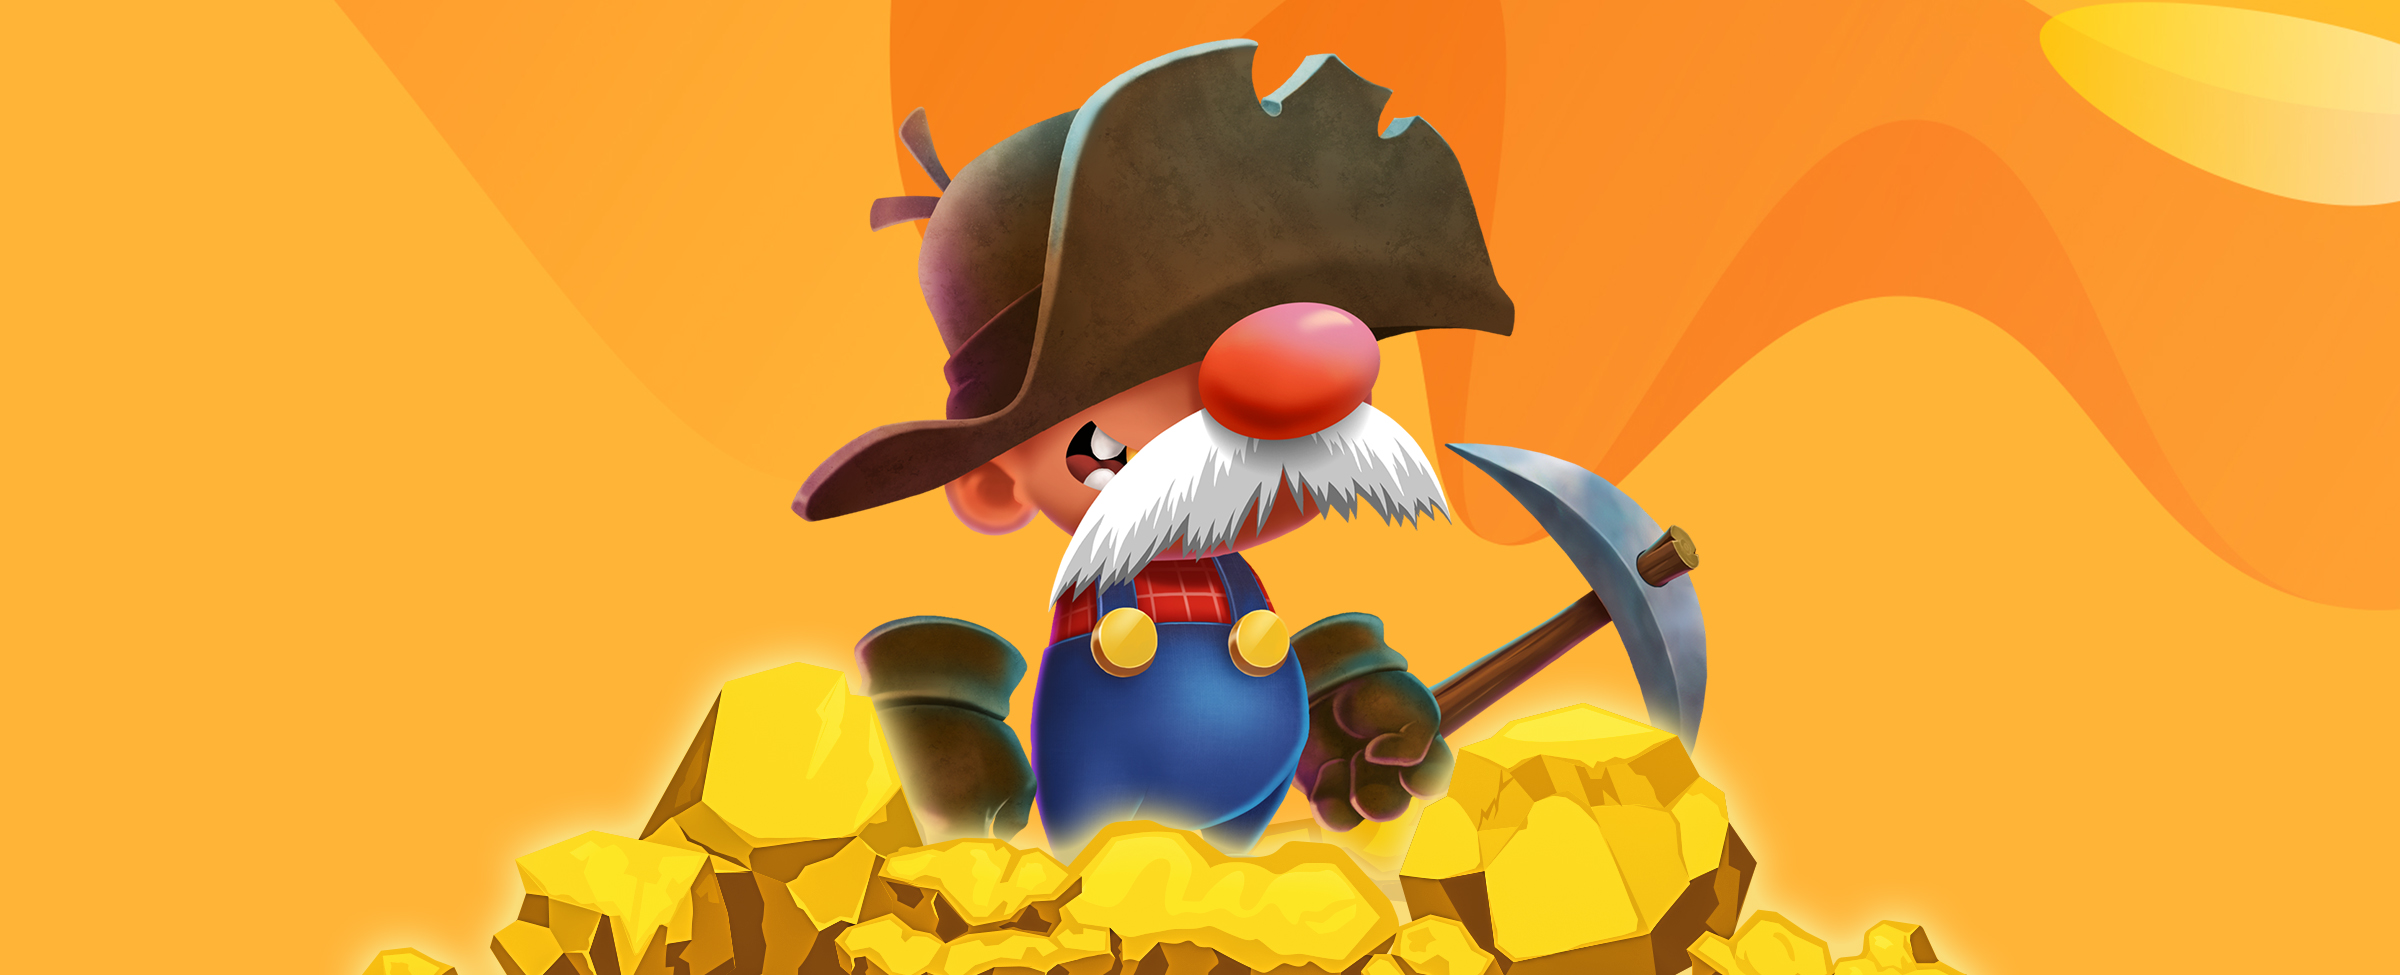 Hold onto your handrail, because you’re in for a ride with Gus – the most loveable character of them all! Dig through the payload when you play Gold Rush Gus.